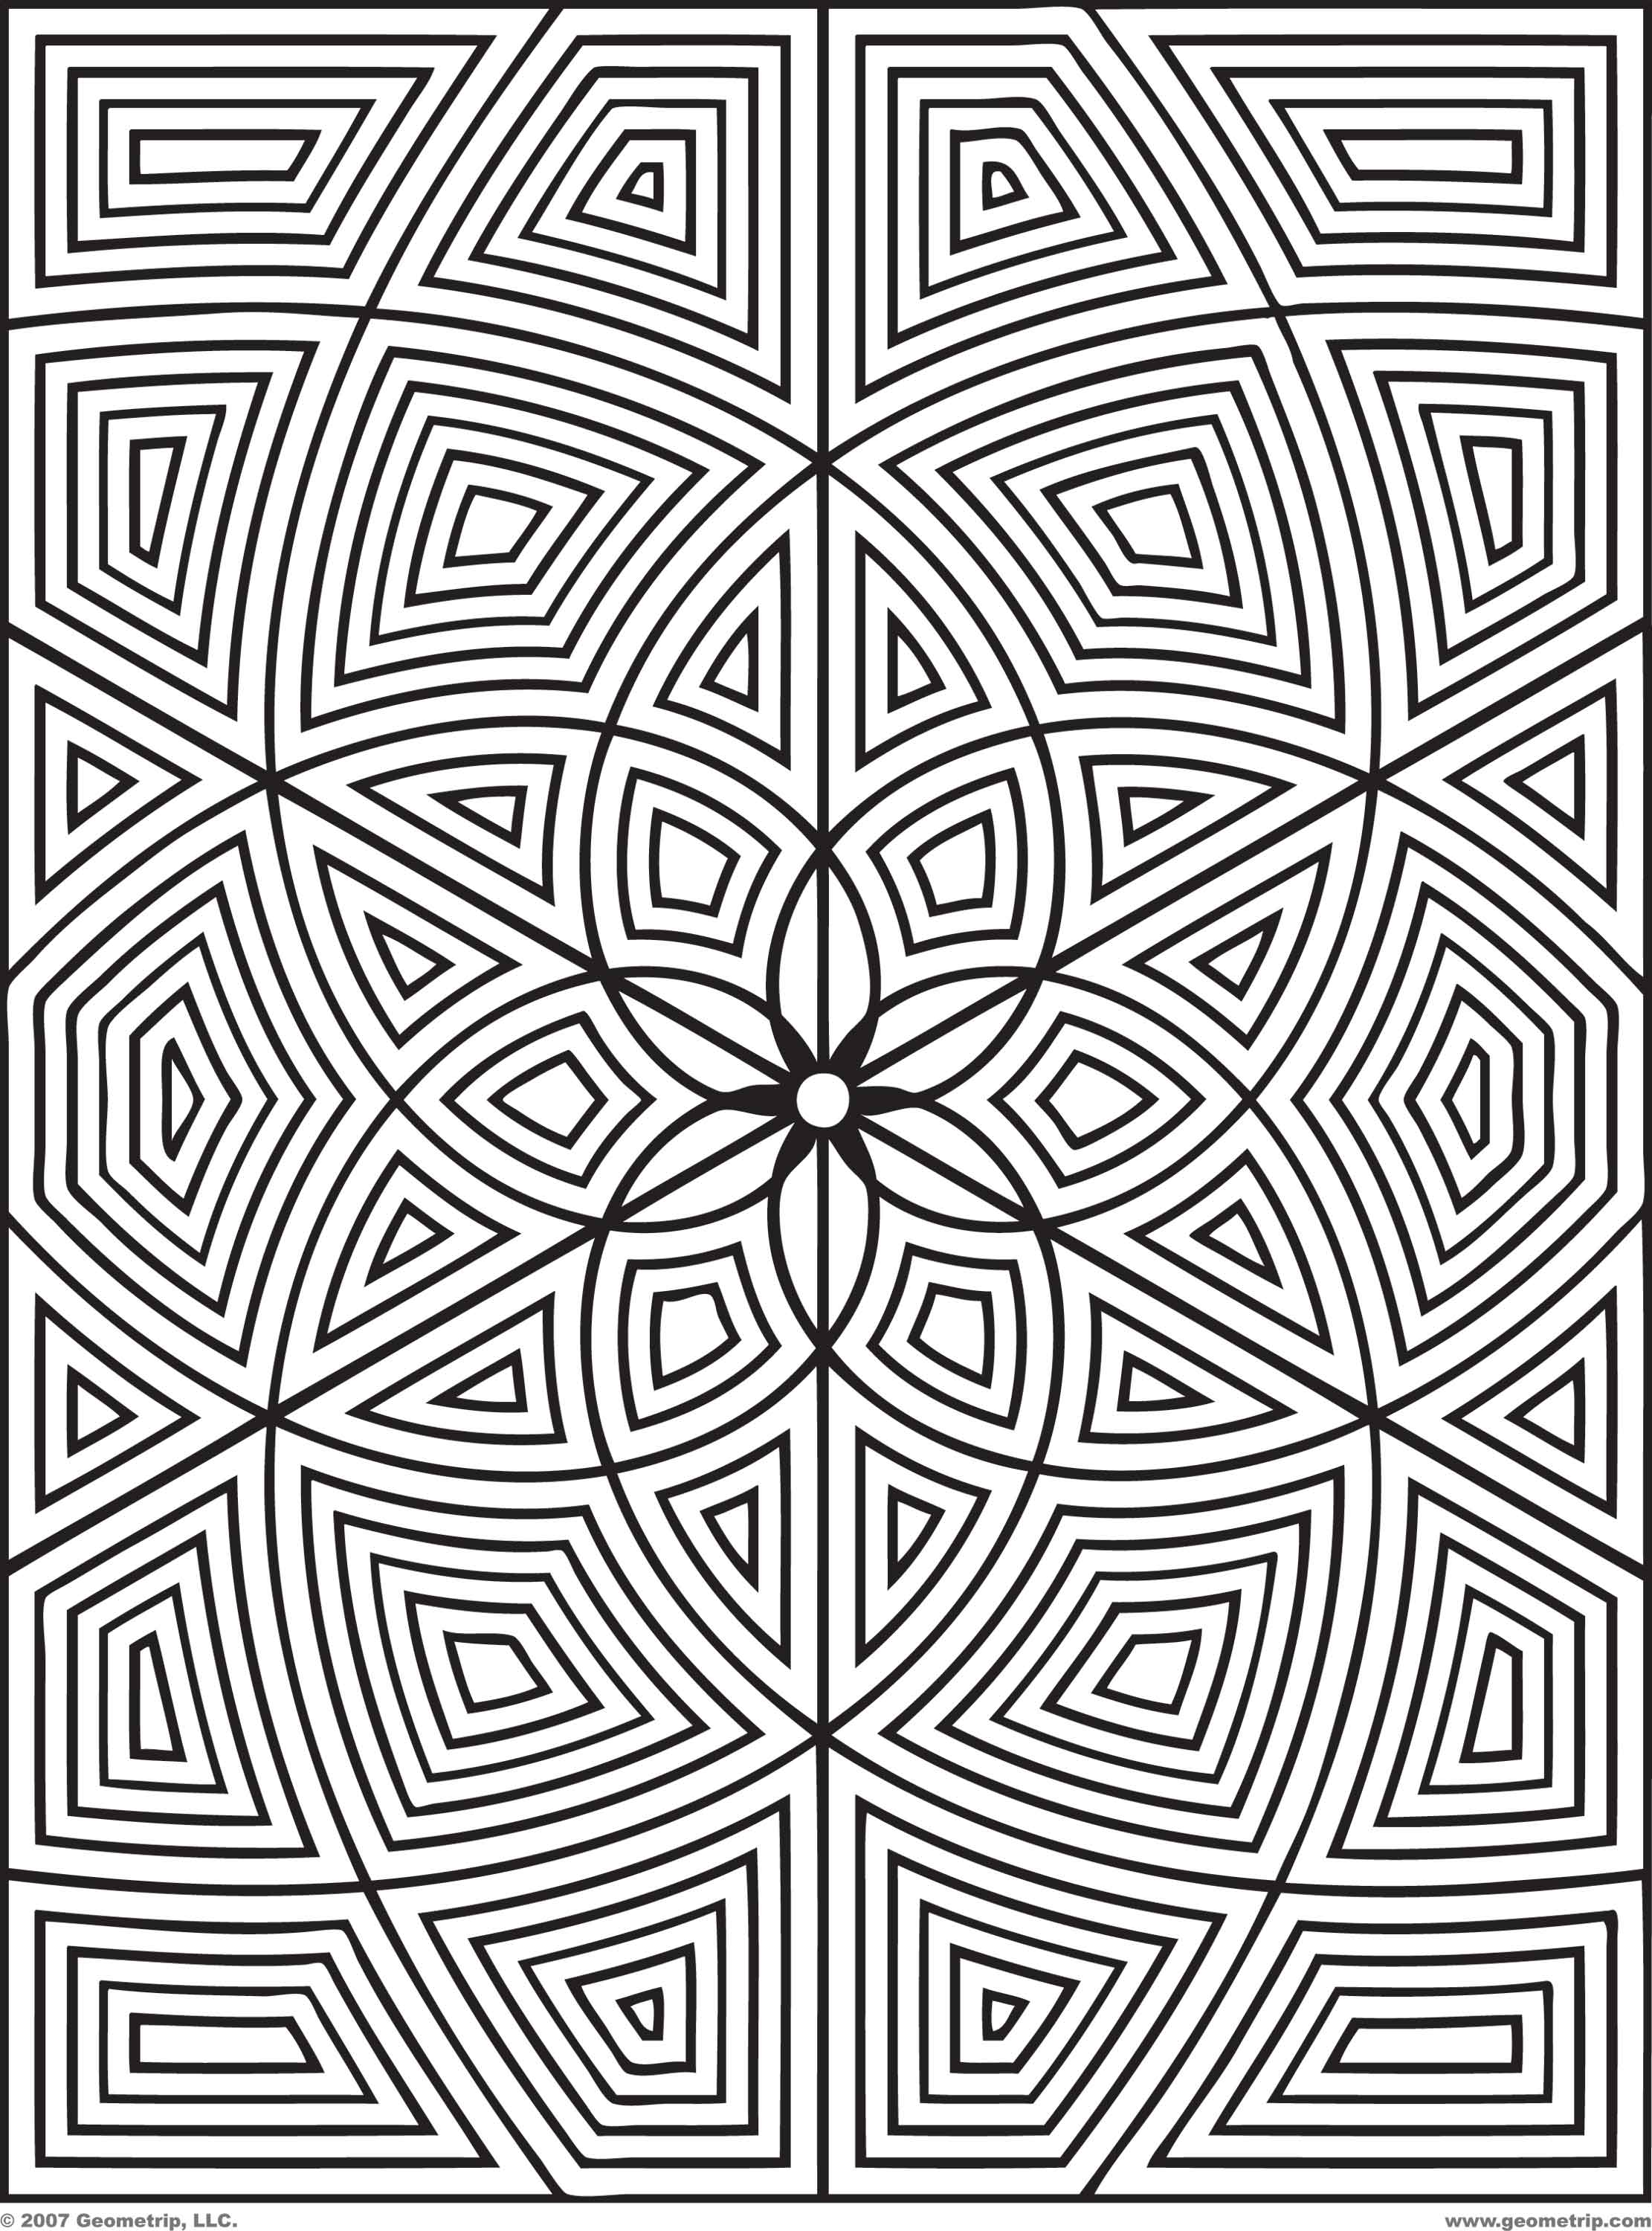 9 Printable Animal Coloring Pages Geometric Design Pattern Images